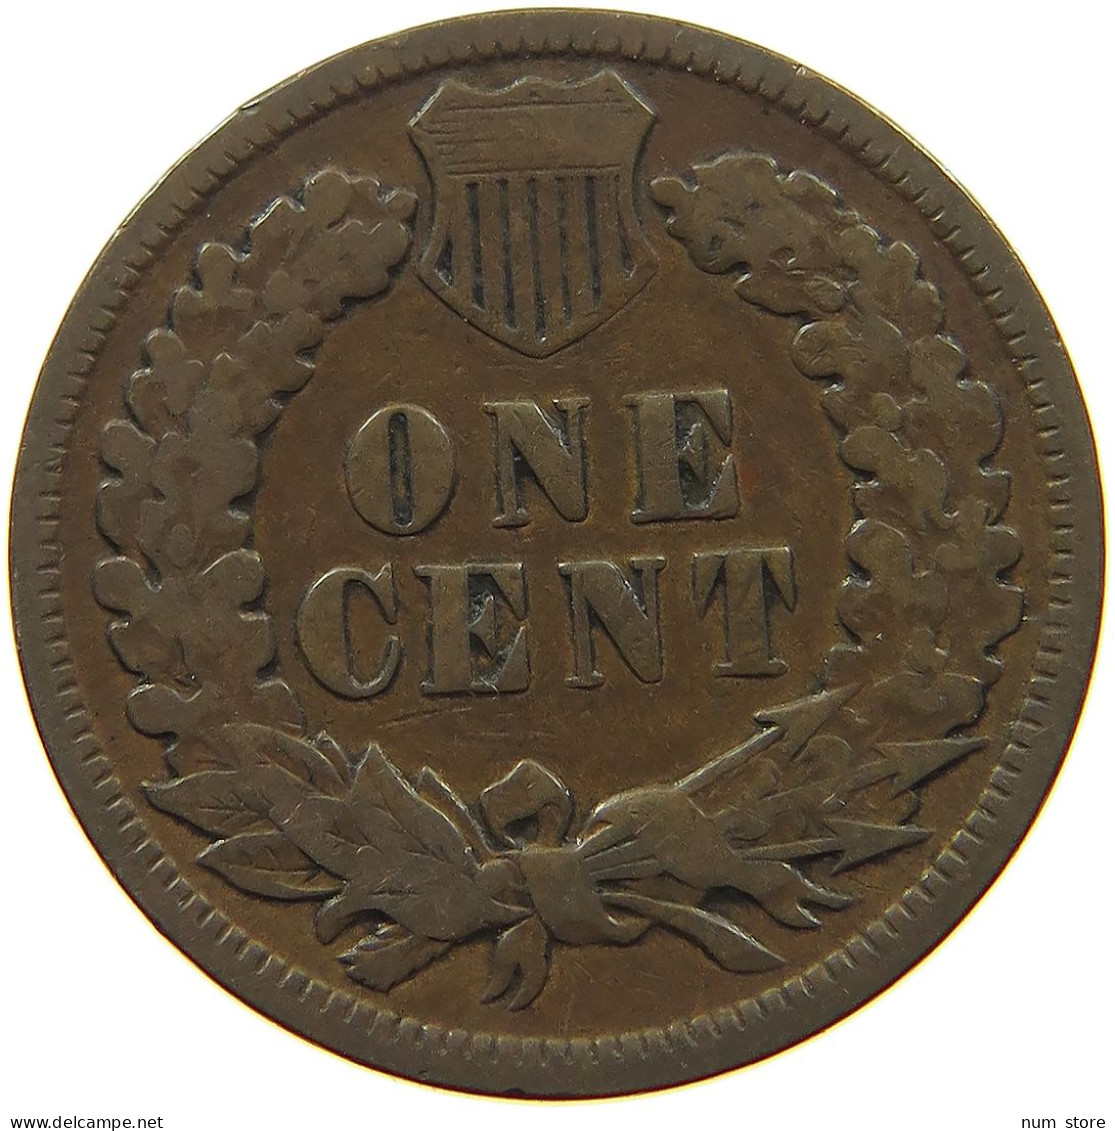 UNITED STATES OF AMERICA CENT 1890 INDIAN HEAD #s063 0307 - 1859-1909: Indian Head